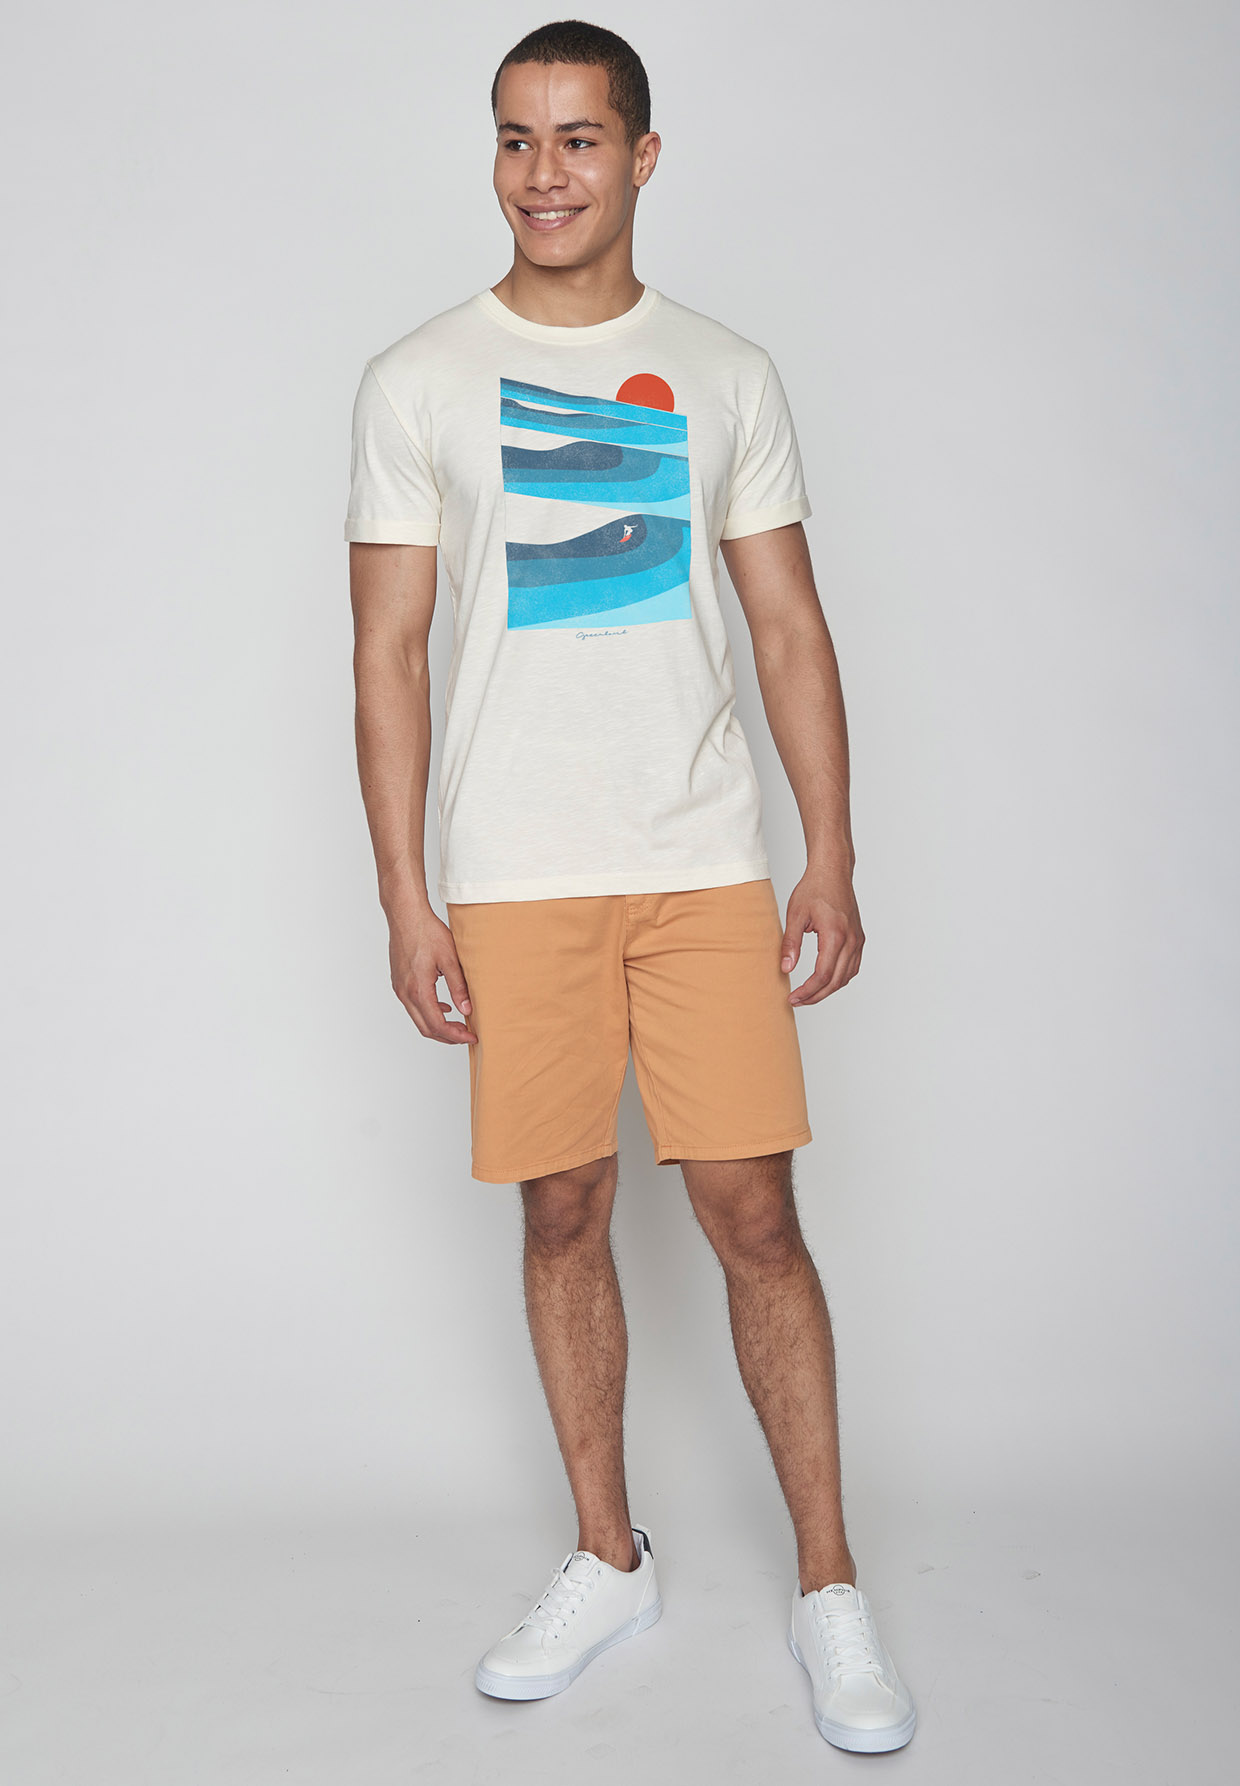 Print T-Shirt Nature Perfect Waves Roll Creme White